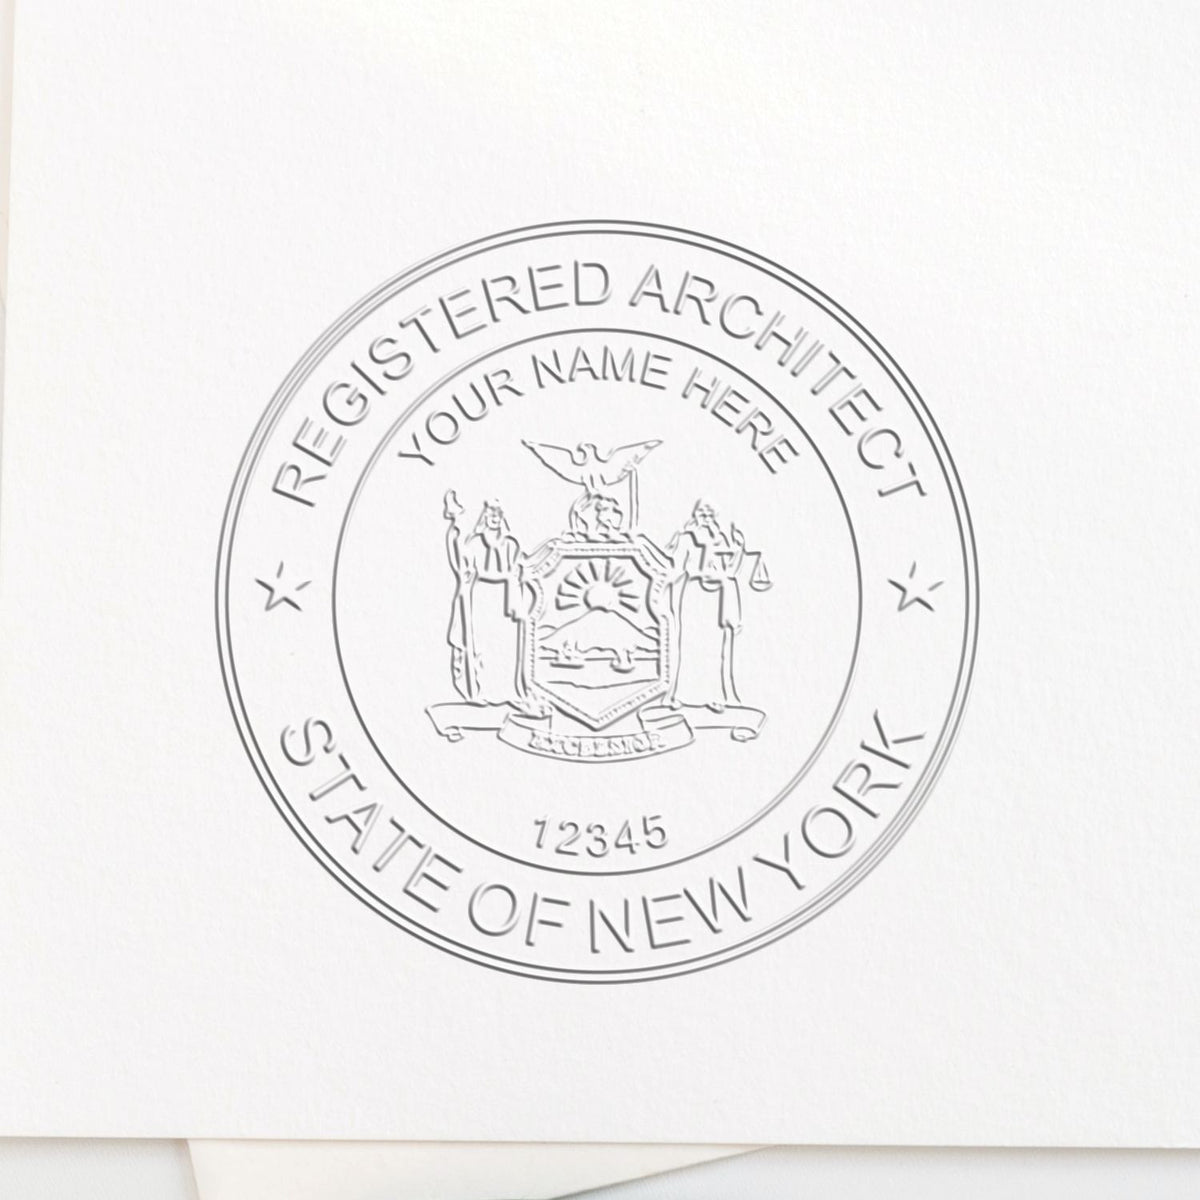 The State of New York Architectural Seal Embosser stamp impression comes to life with a crisp, detailed photo on paper - showcasing true professional quality.